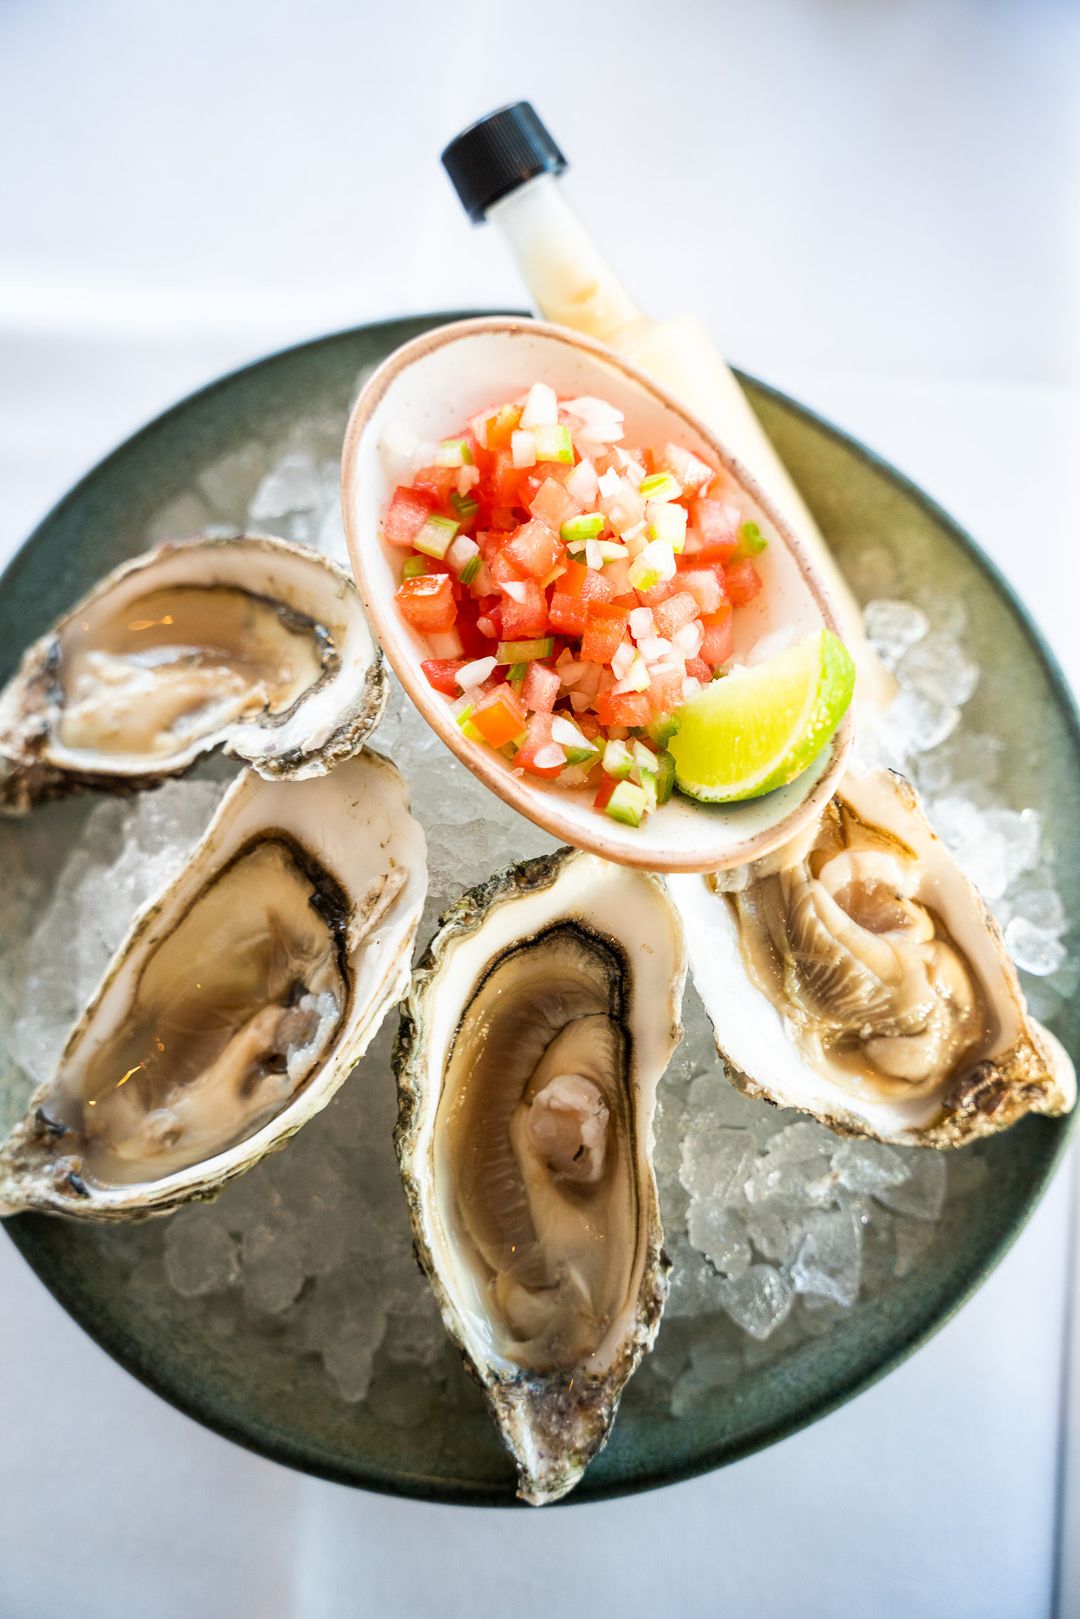 Fresh oysters - a plate of gastronomically refined pleasure